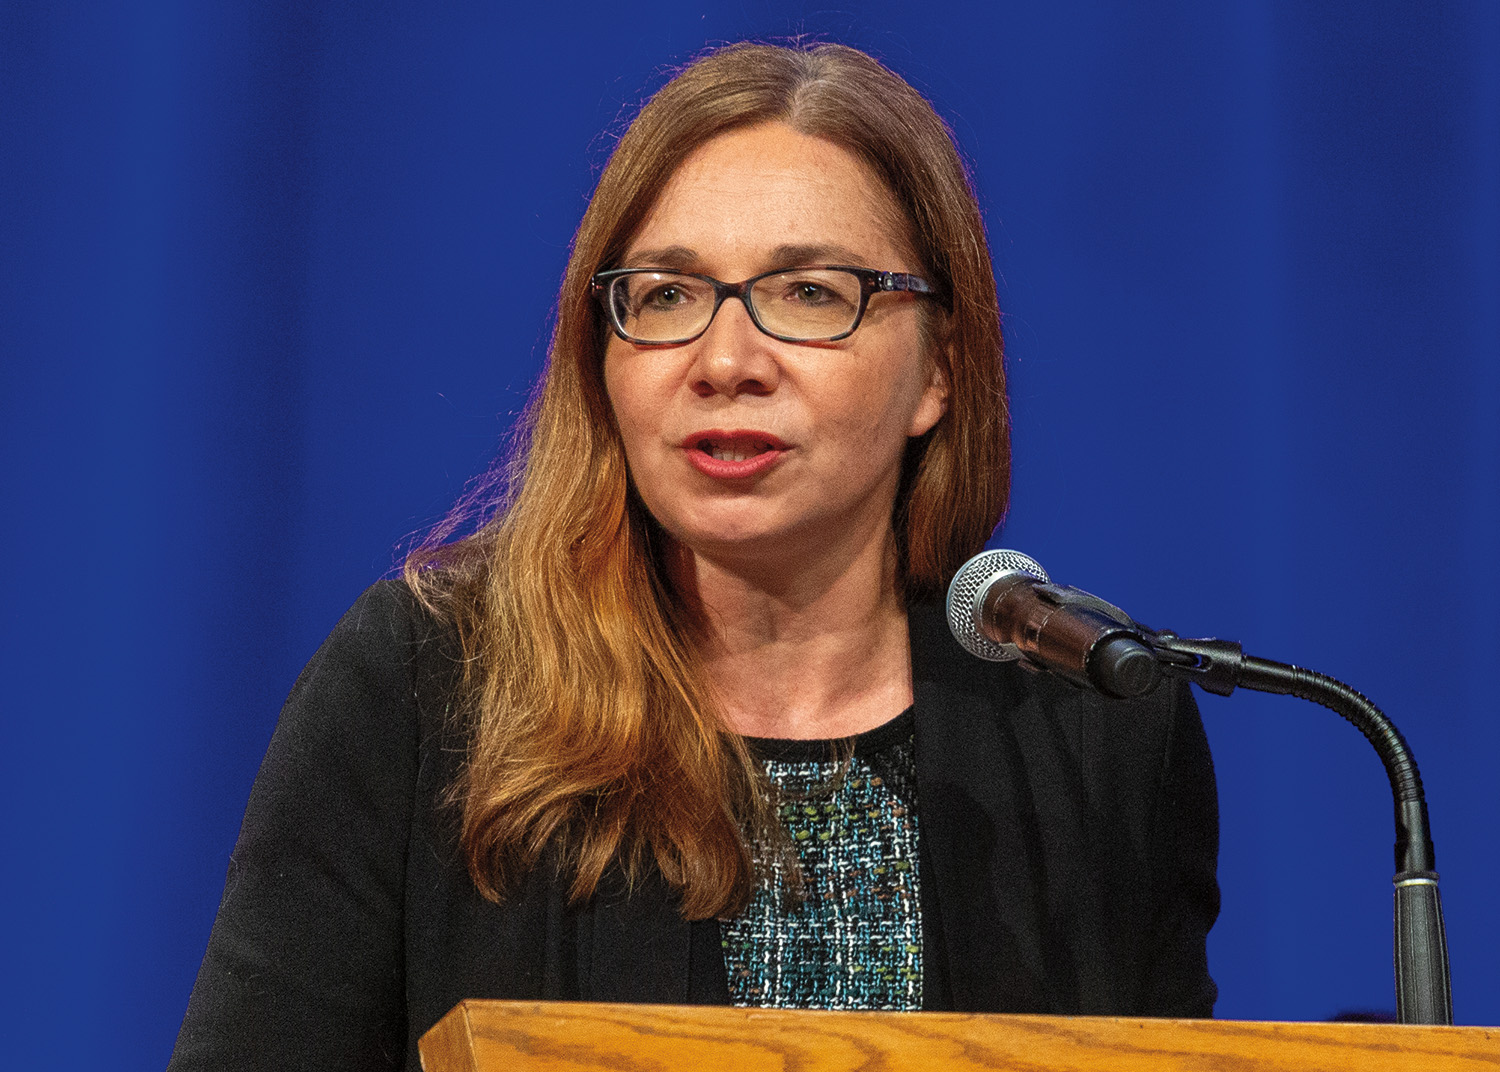 Katharine Hayhoe stands at a podium in front of a microphone. She has long, brown hair and pale amber skin. She wears a dark tweed dress and black cardigan.